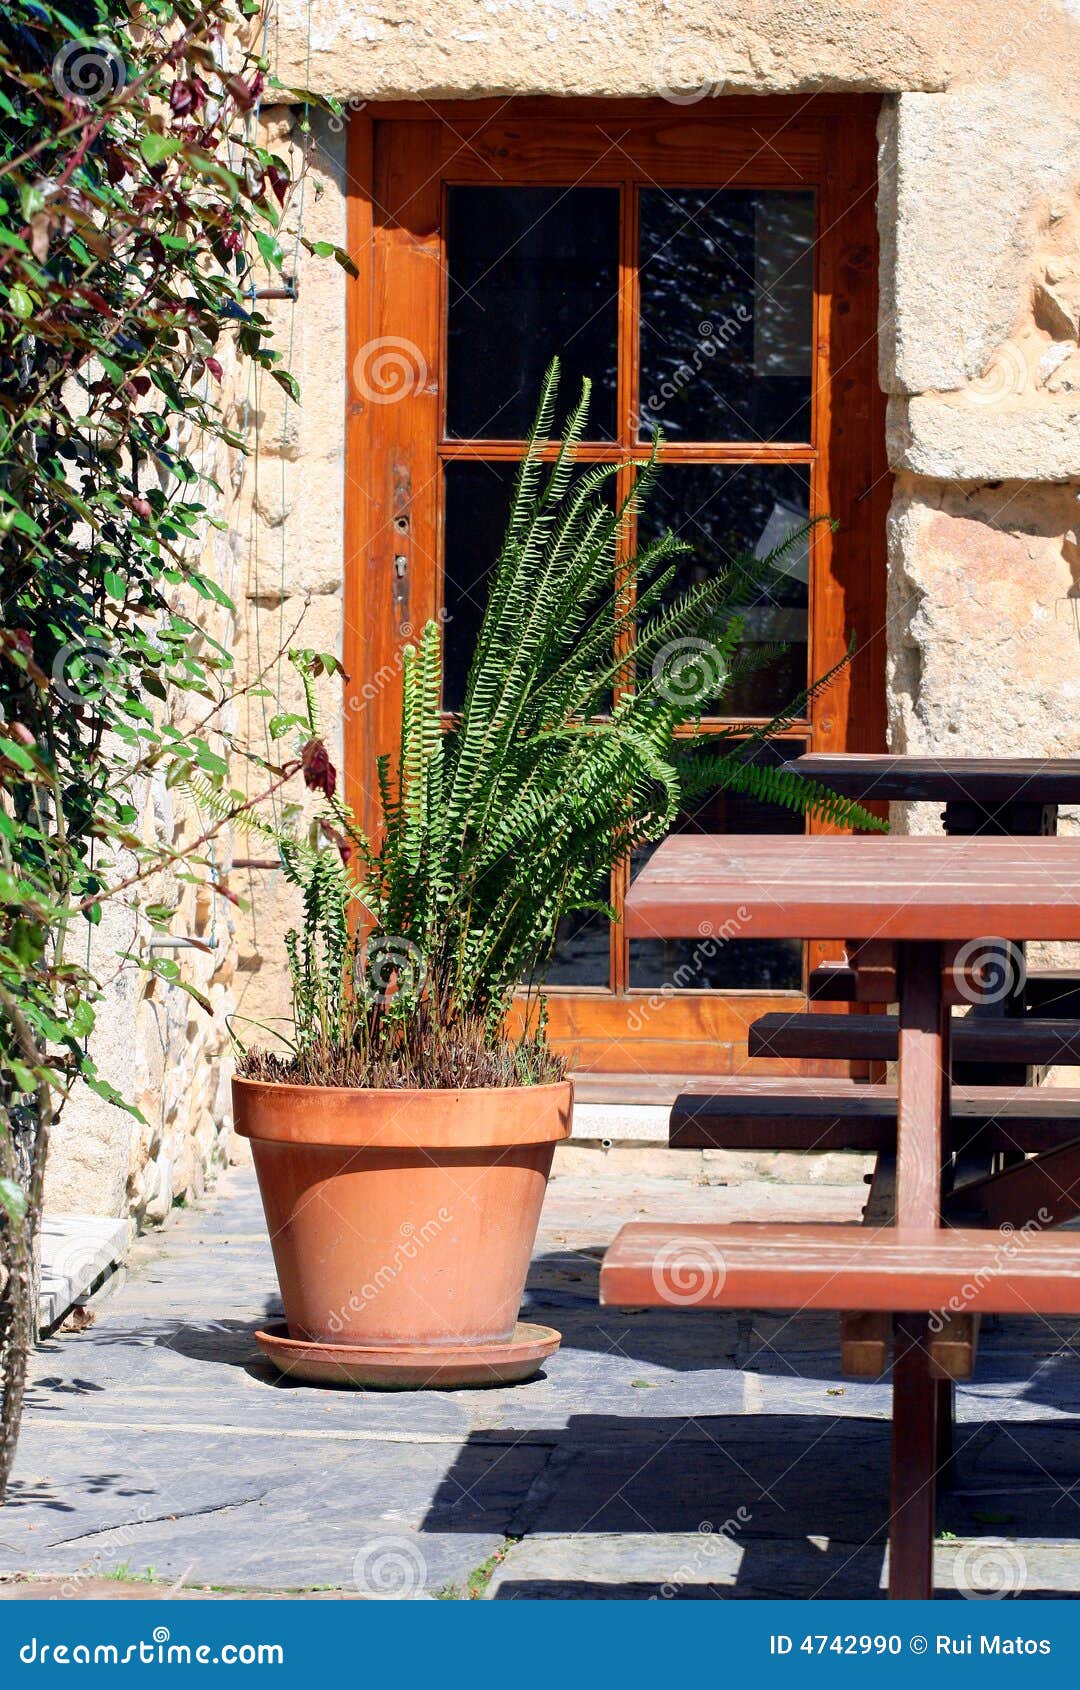 picturesque countryside porch